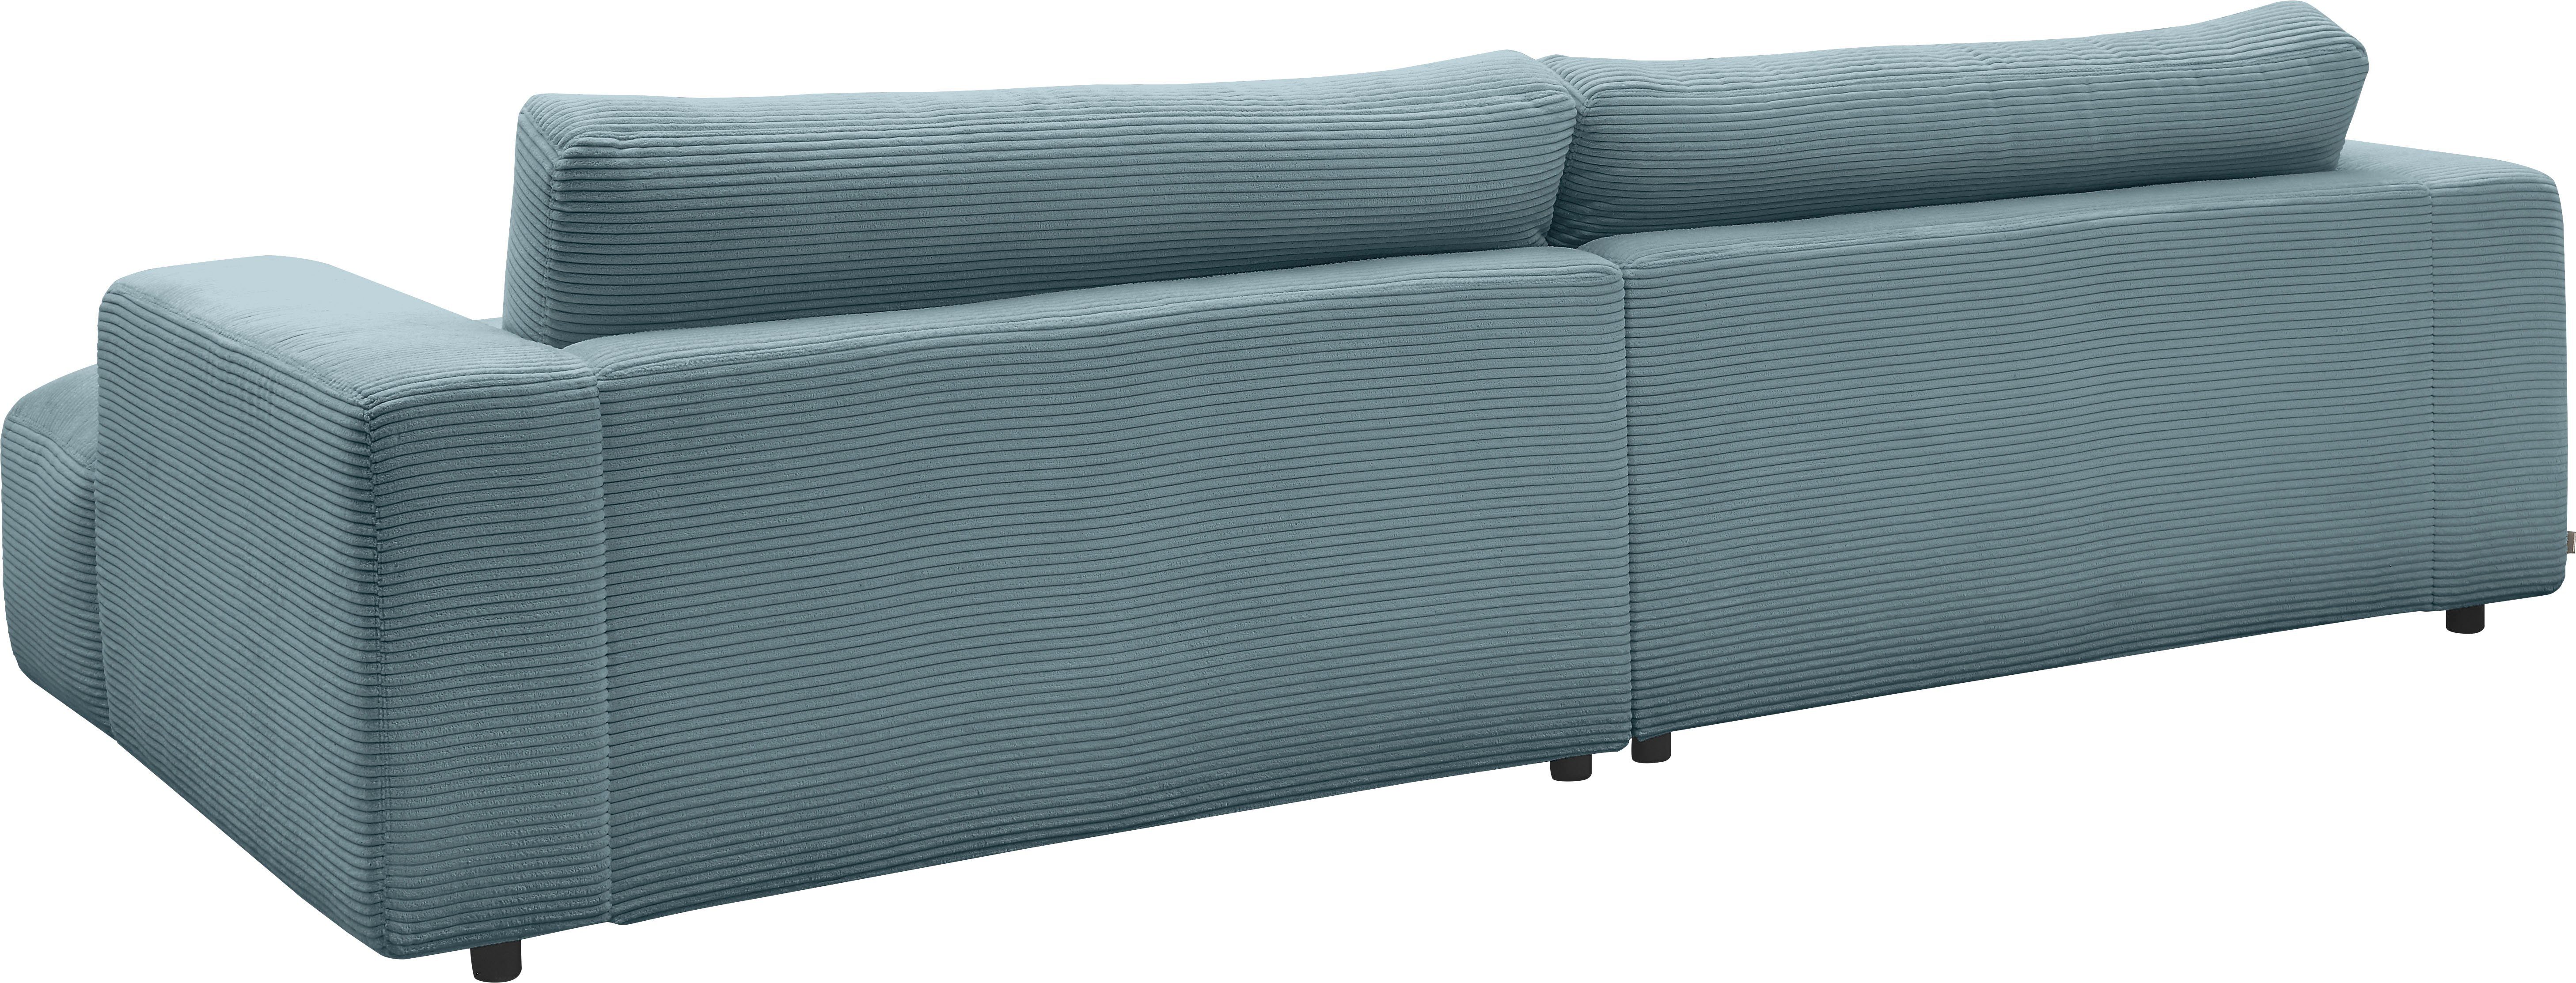 Musterring branded M Loungesofa cm Cord-Bezug, GALLERY Breite by petrol 292 Lucia,